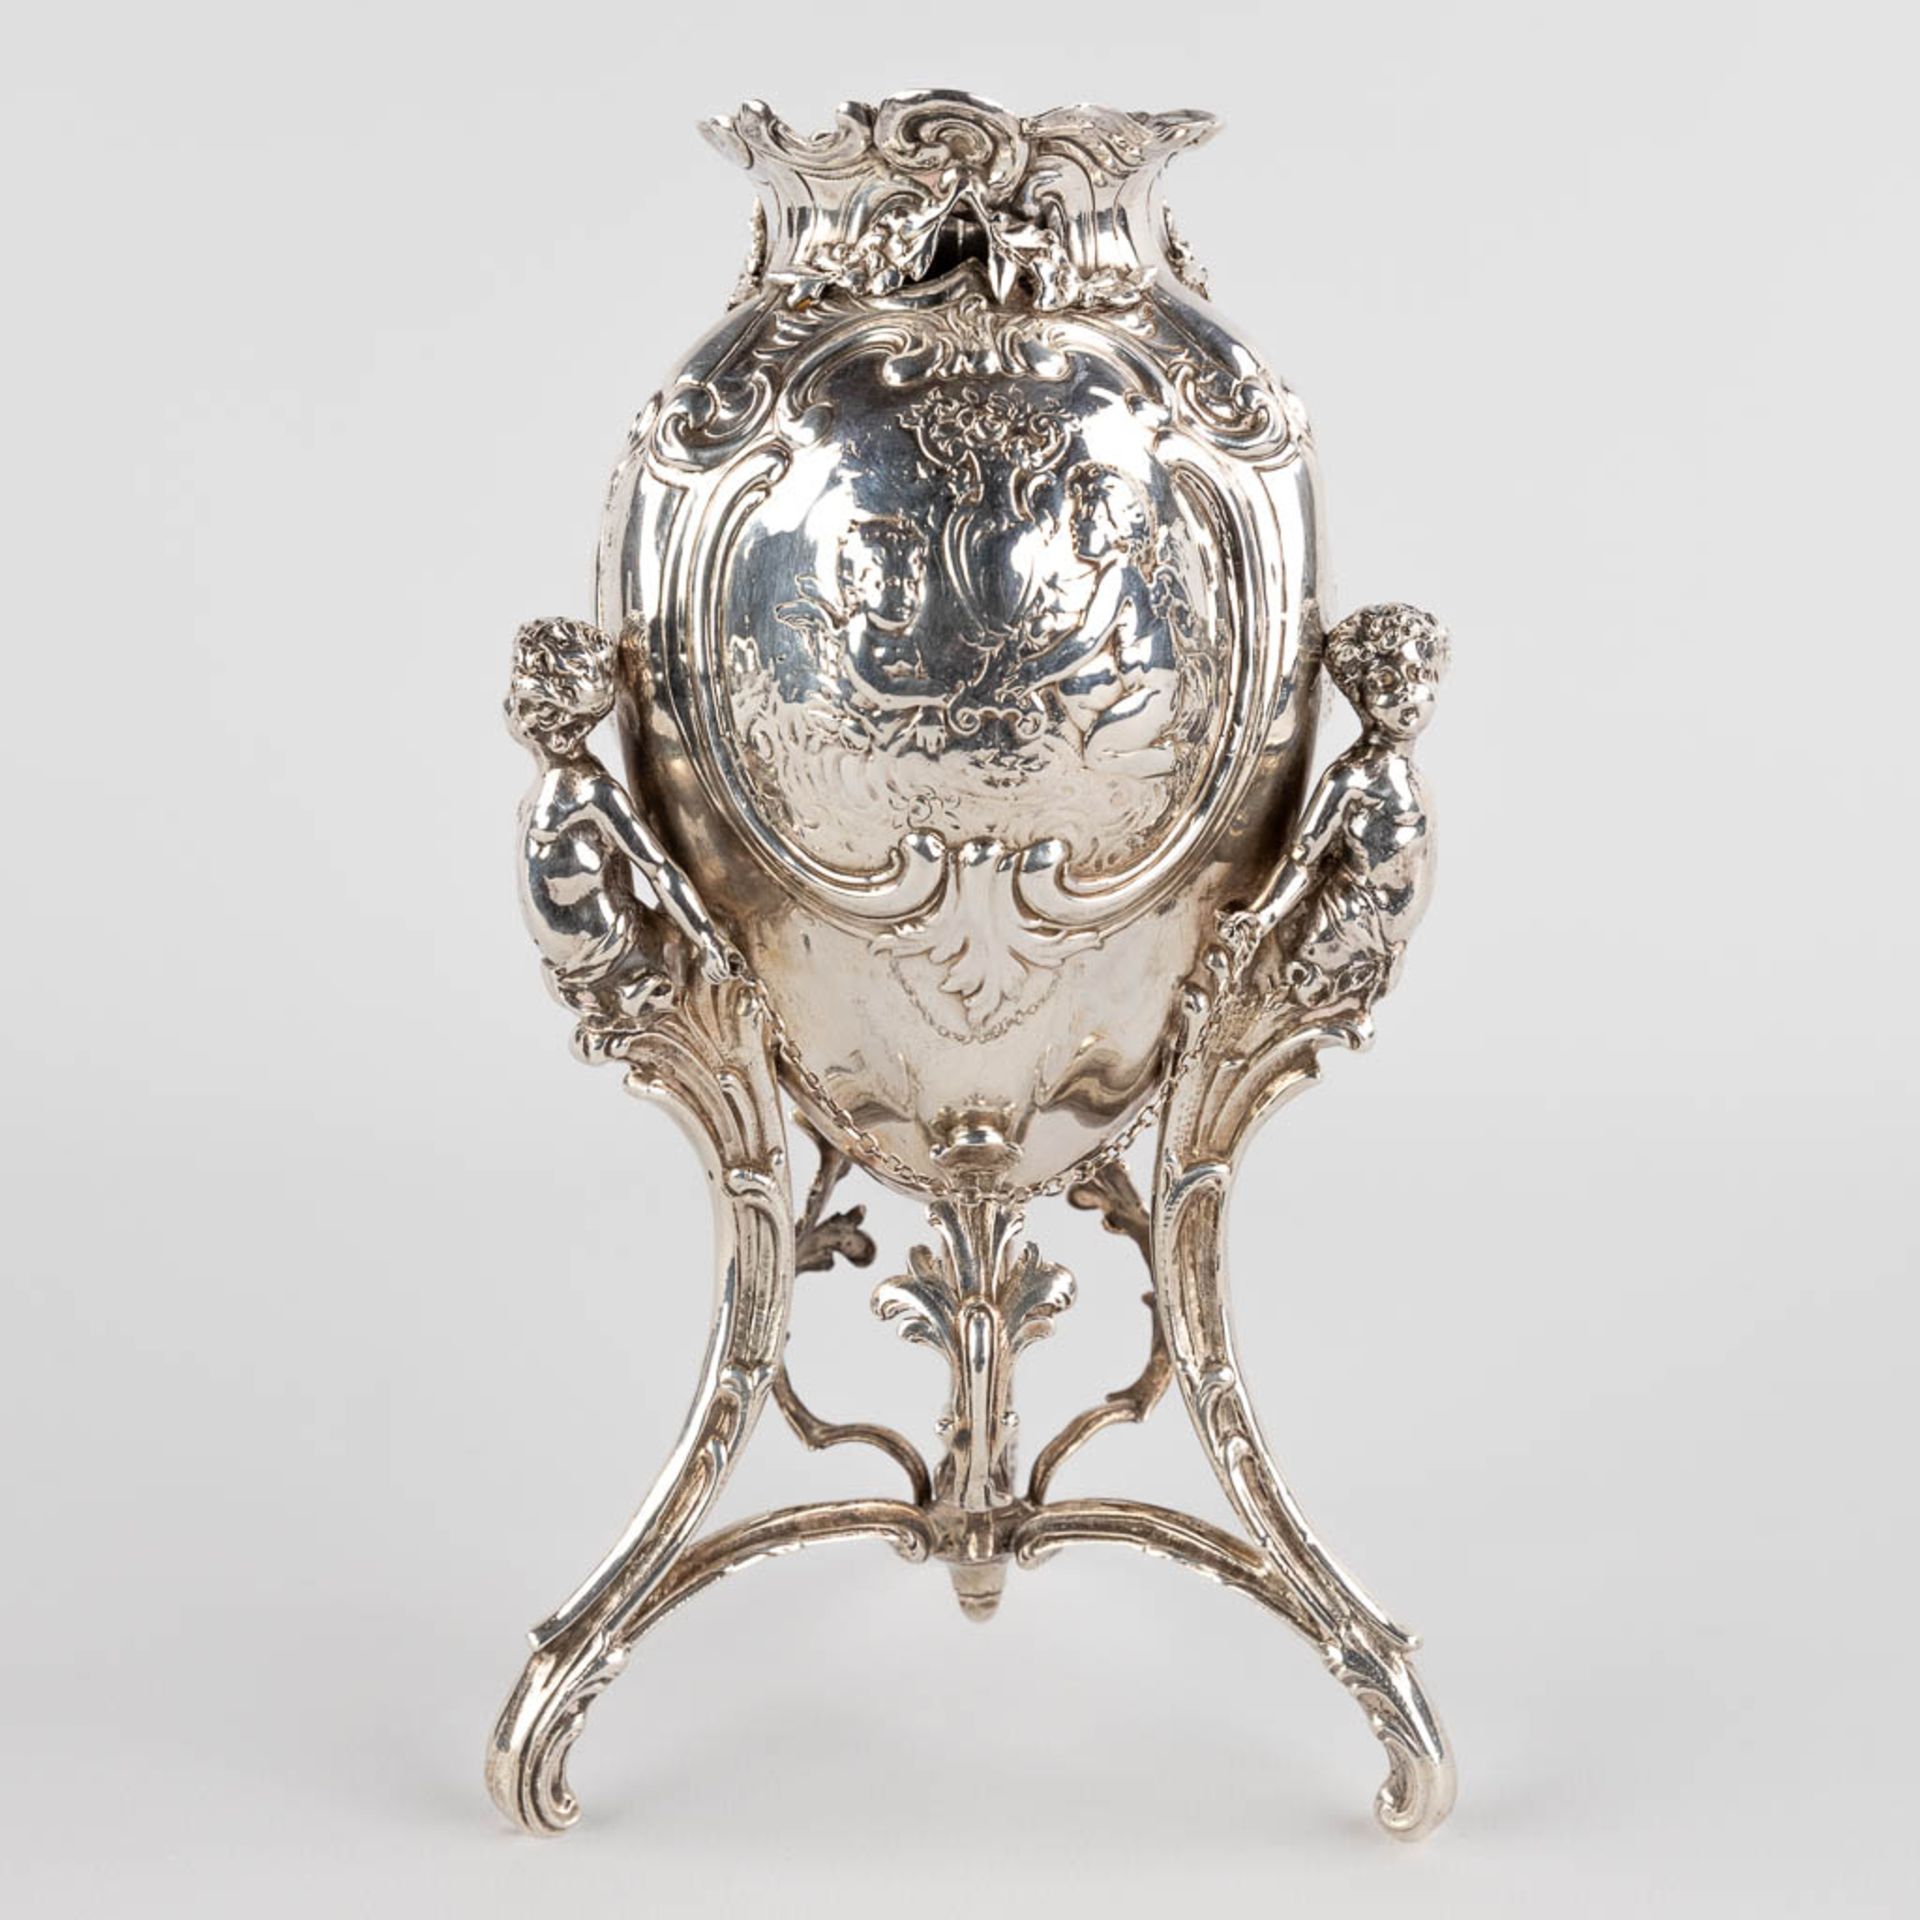 A fine vase, silver in Louis XV style, mounted with 3 putto. 427g. 1906. (D:11 x W:11 x H:20 cm) - Image 5 of 12